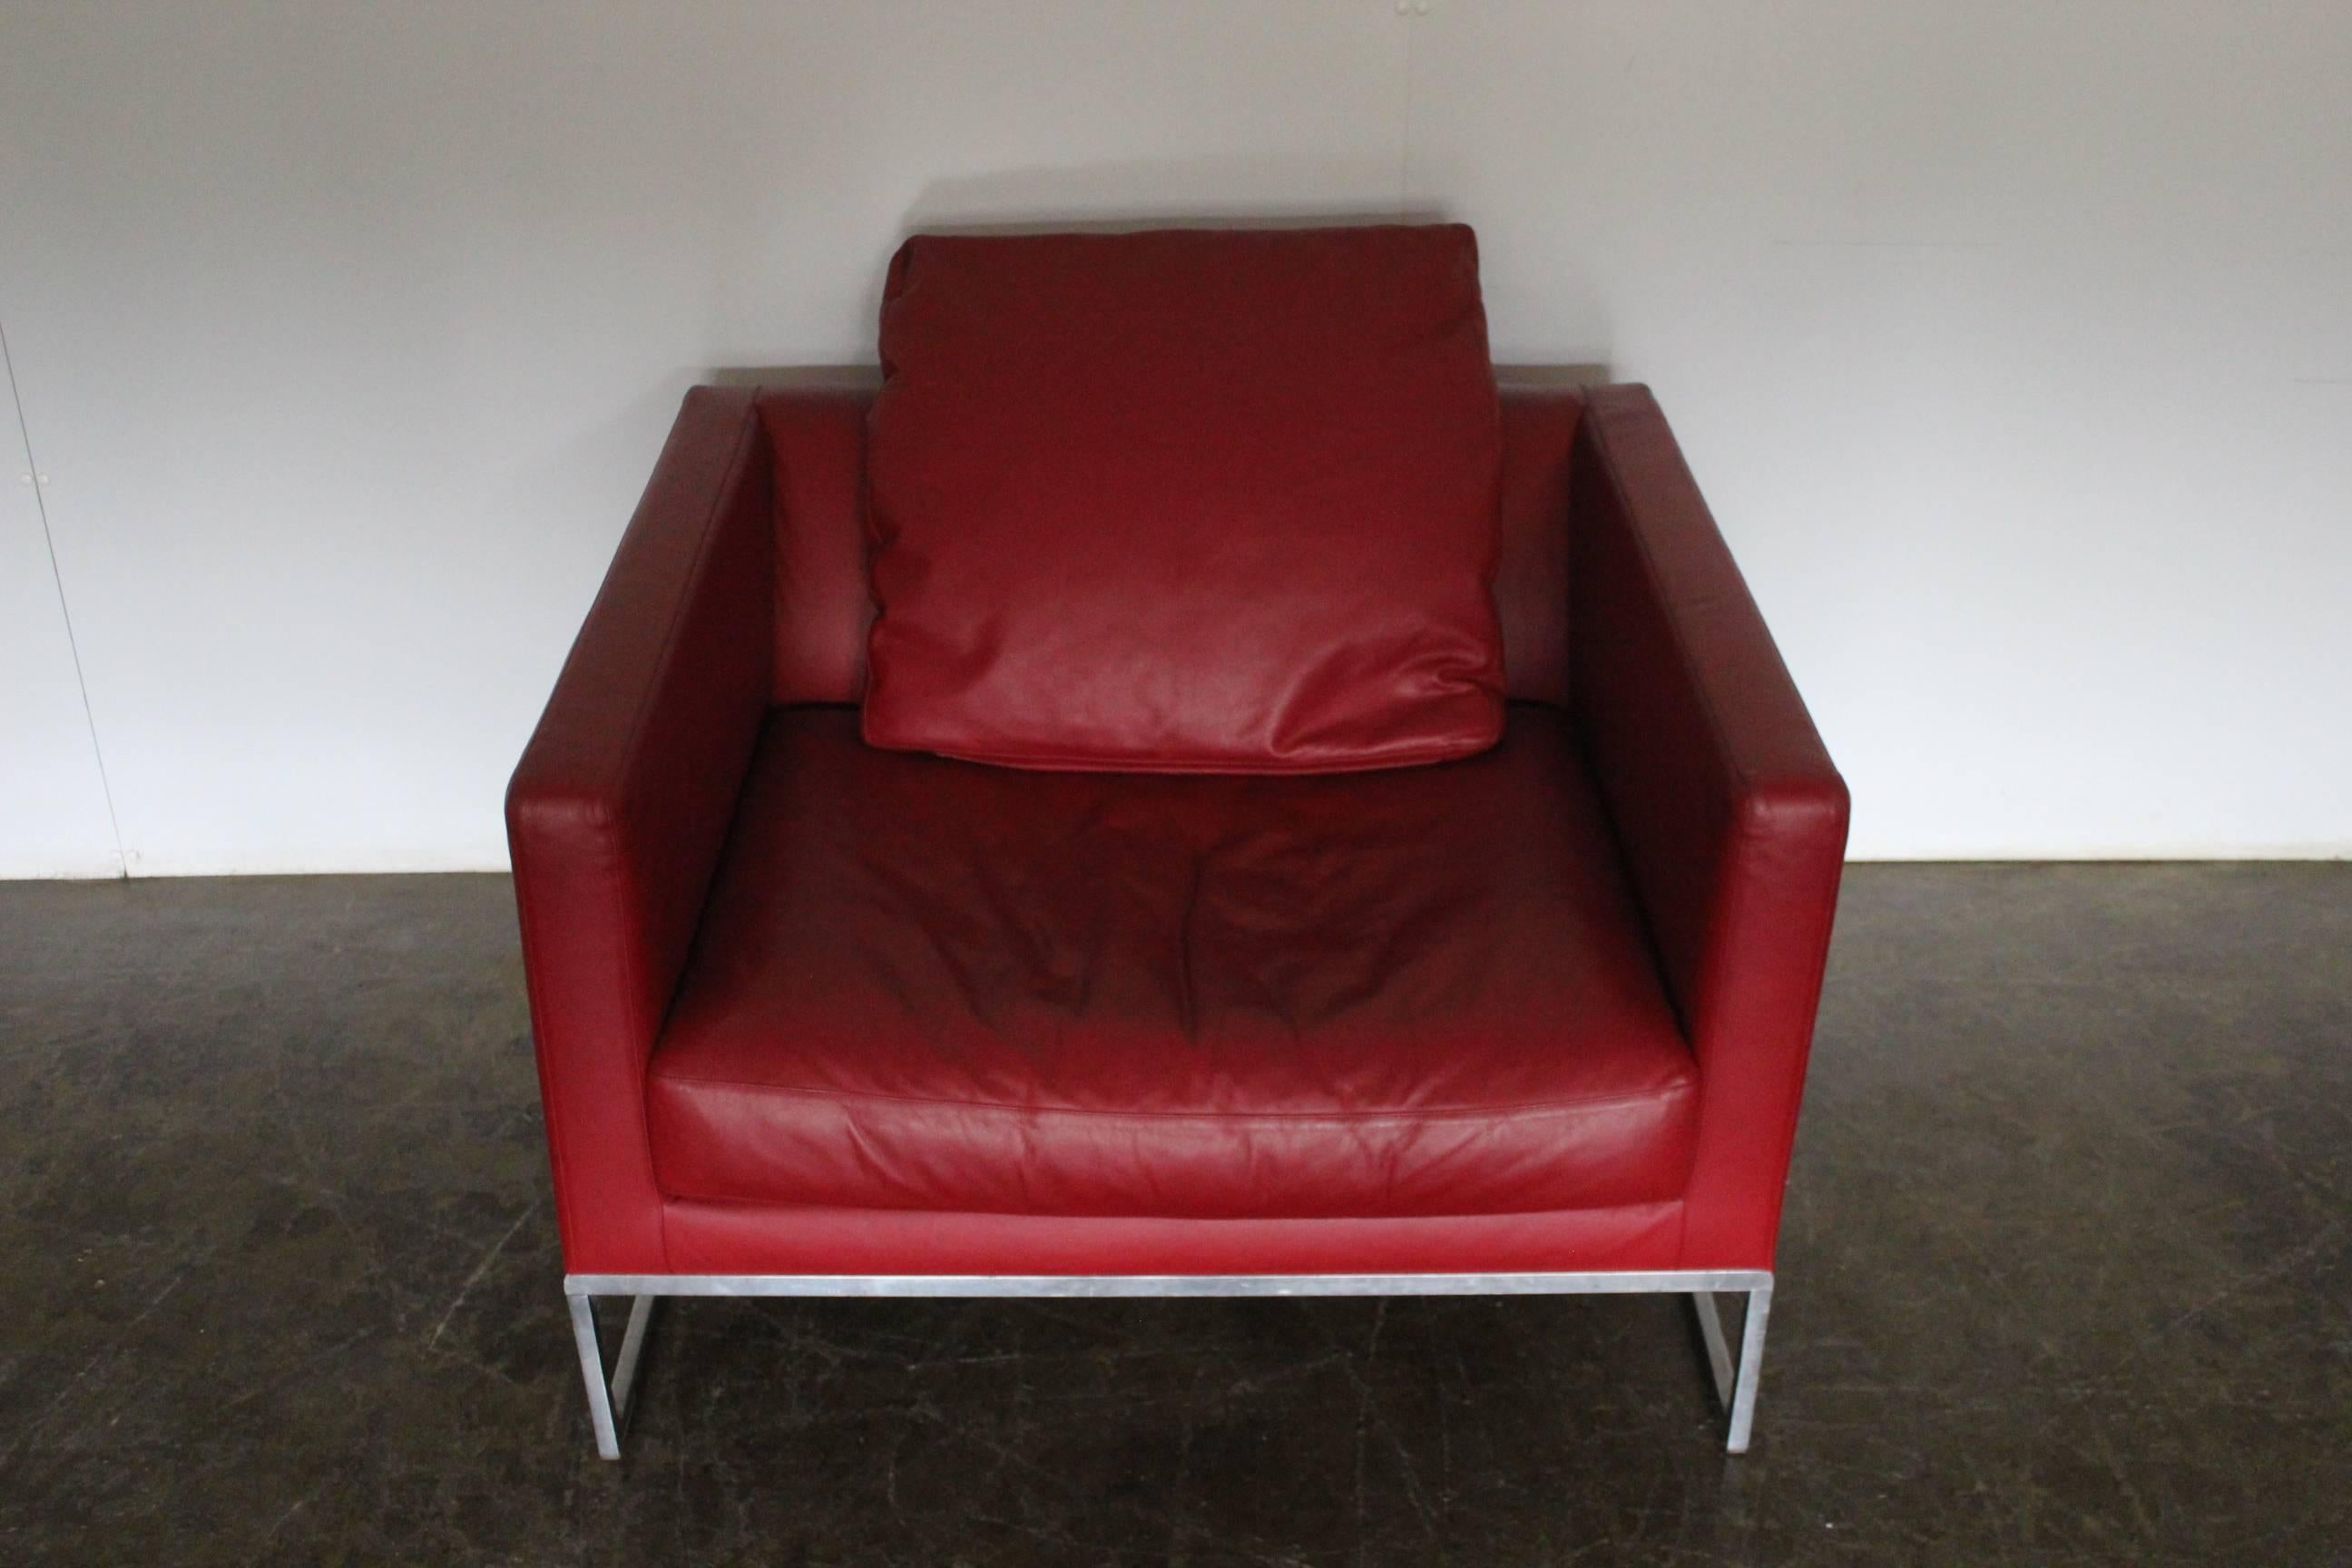 Contemporary B&B Italia “Tight” Large Armchair in “Gamma” Red Leather